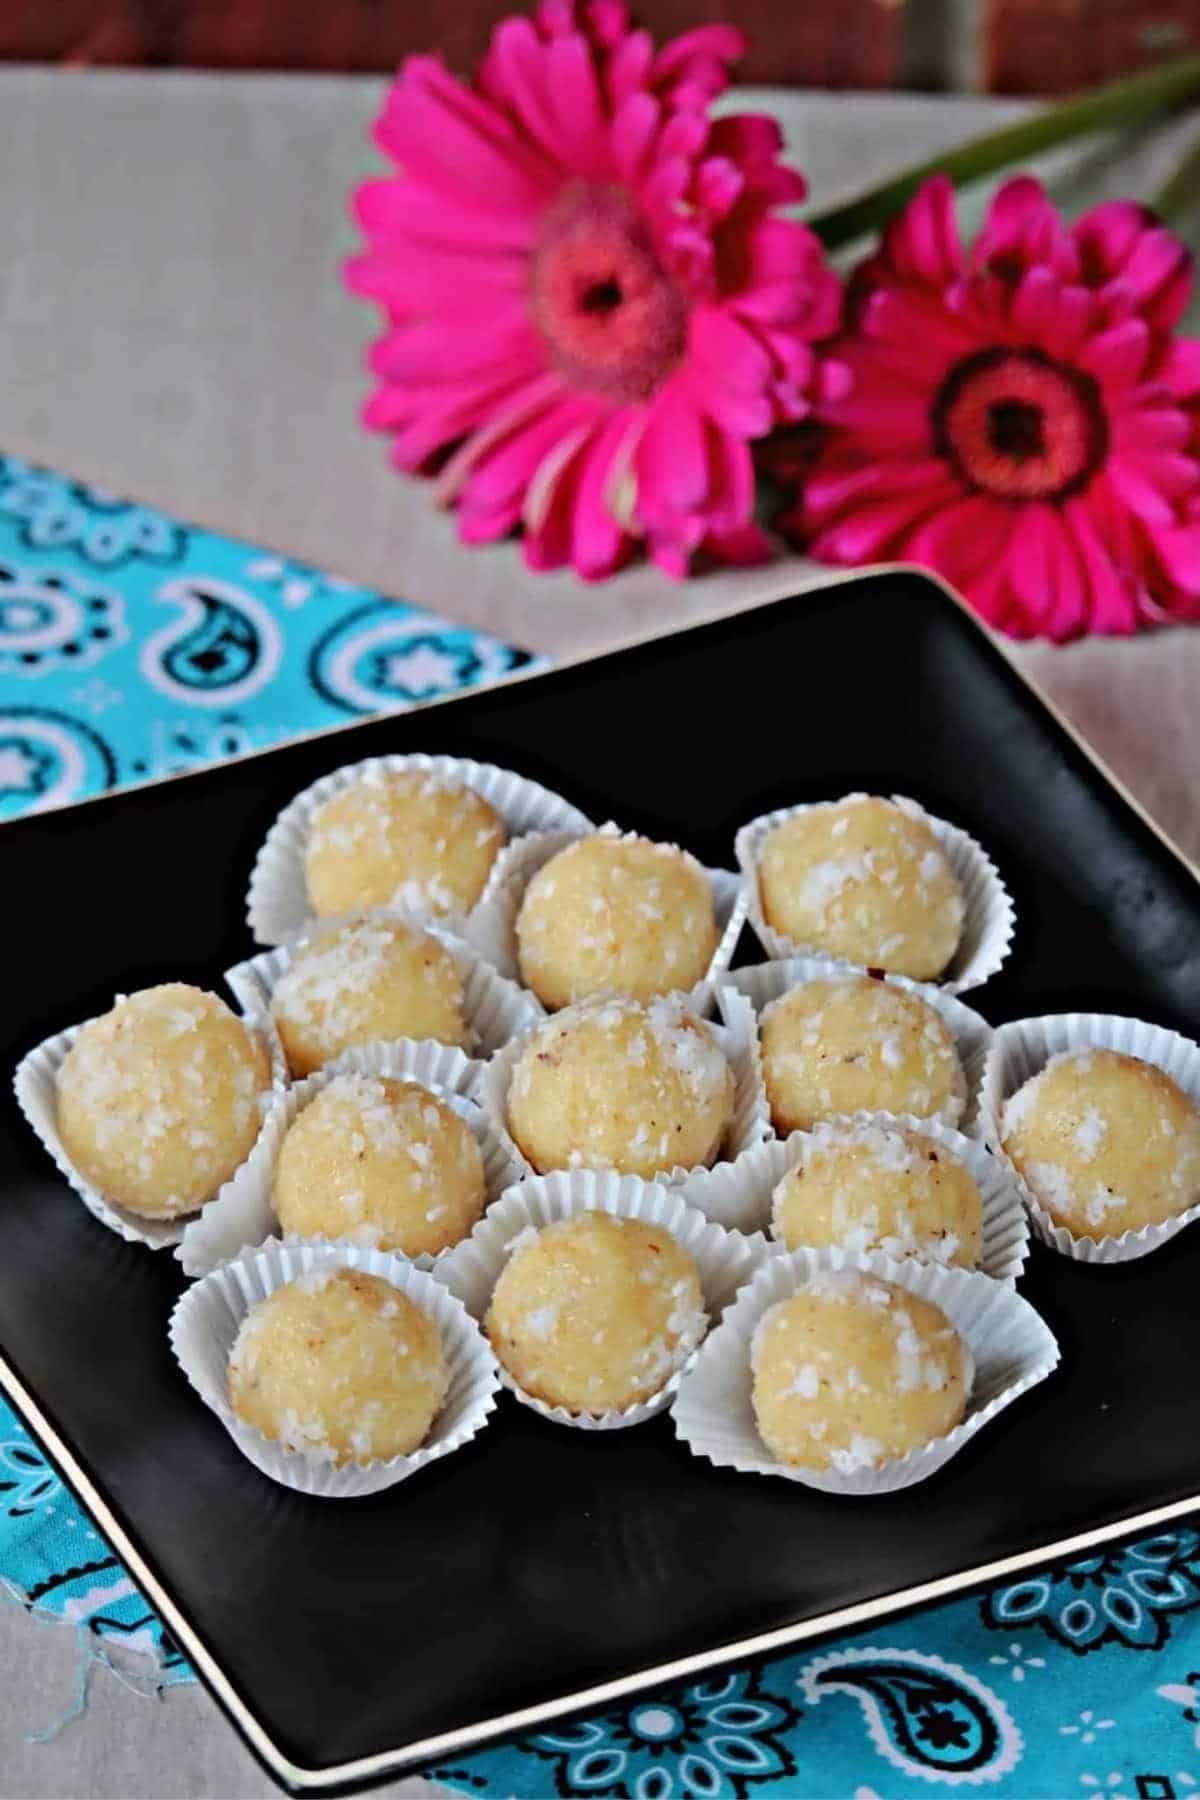 coconut laddu placed on a black plate